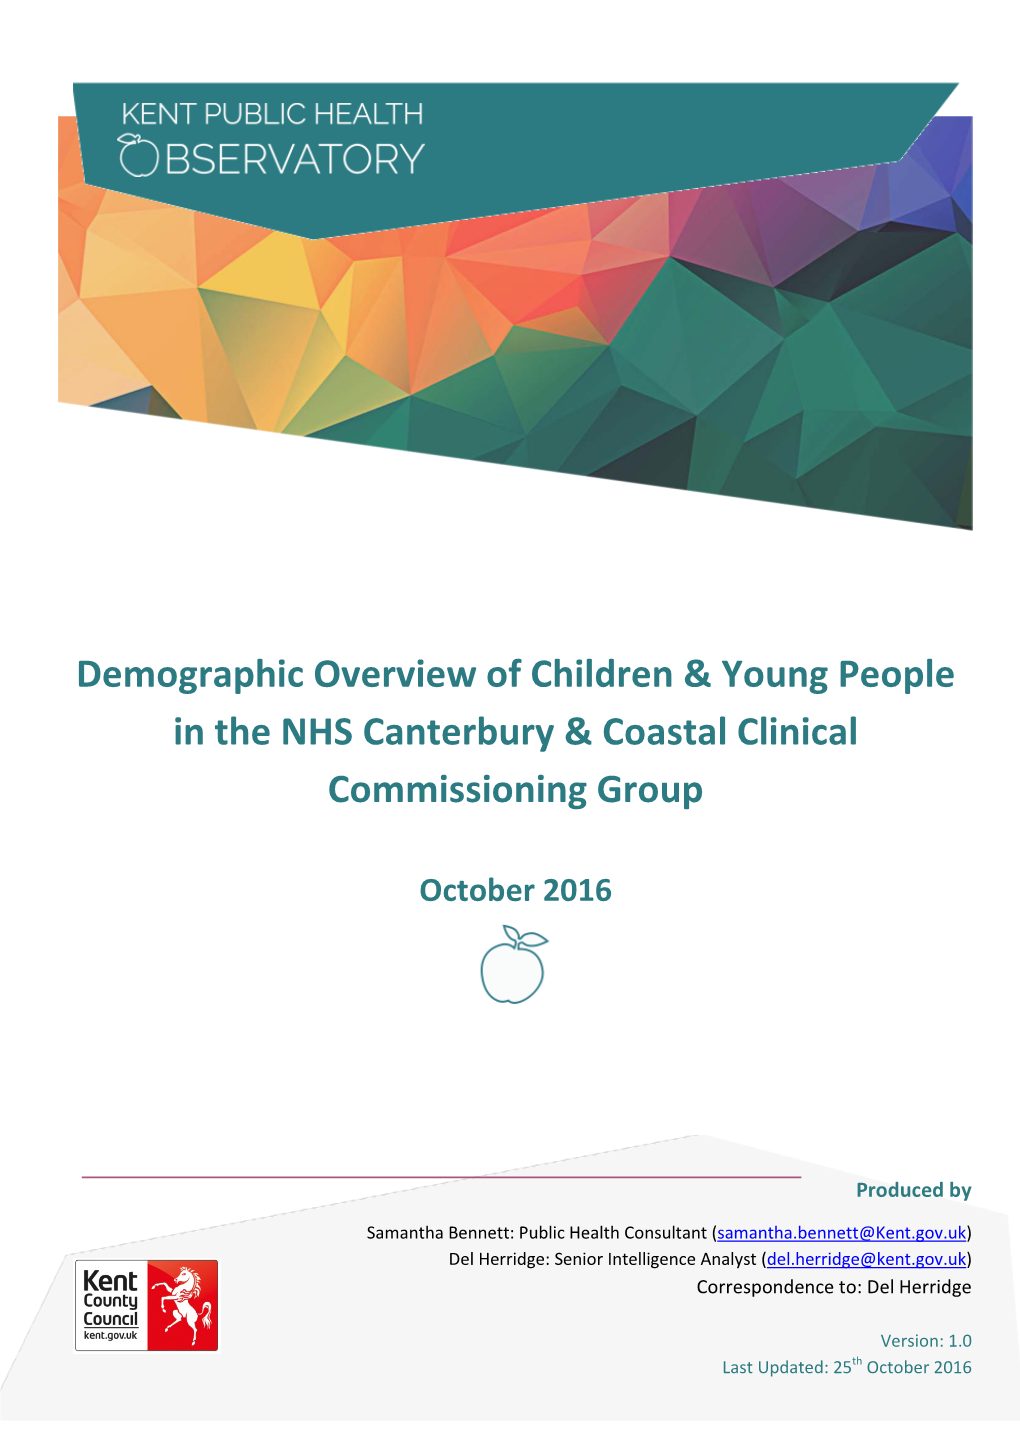 Demographic Overview of Children & Young People in the NHS Canterbury & Coastal Clinical Commissioning Group